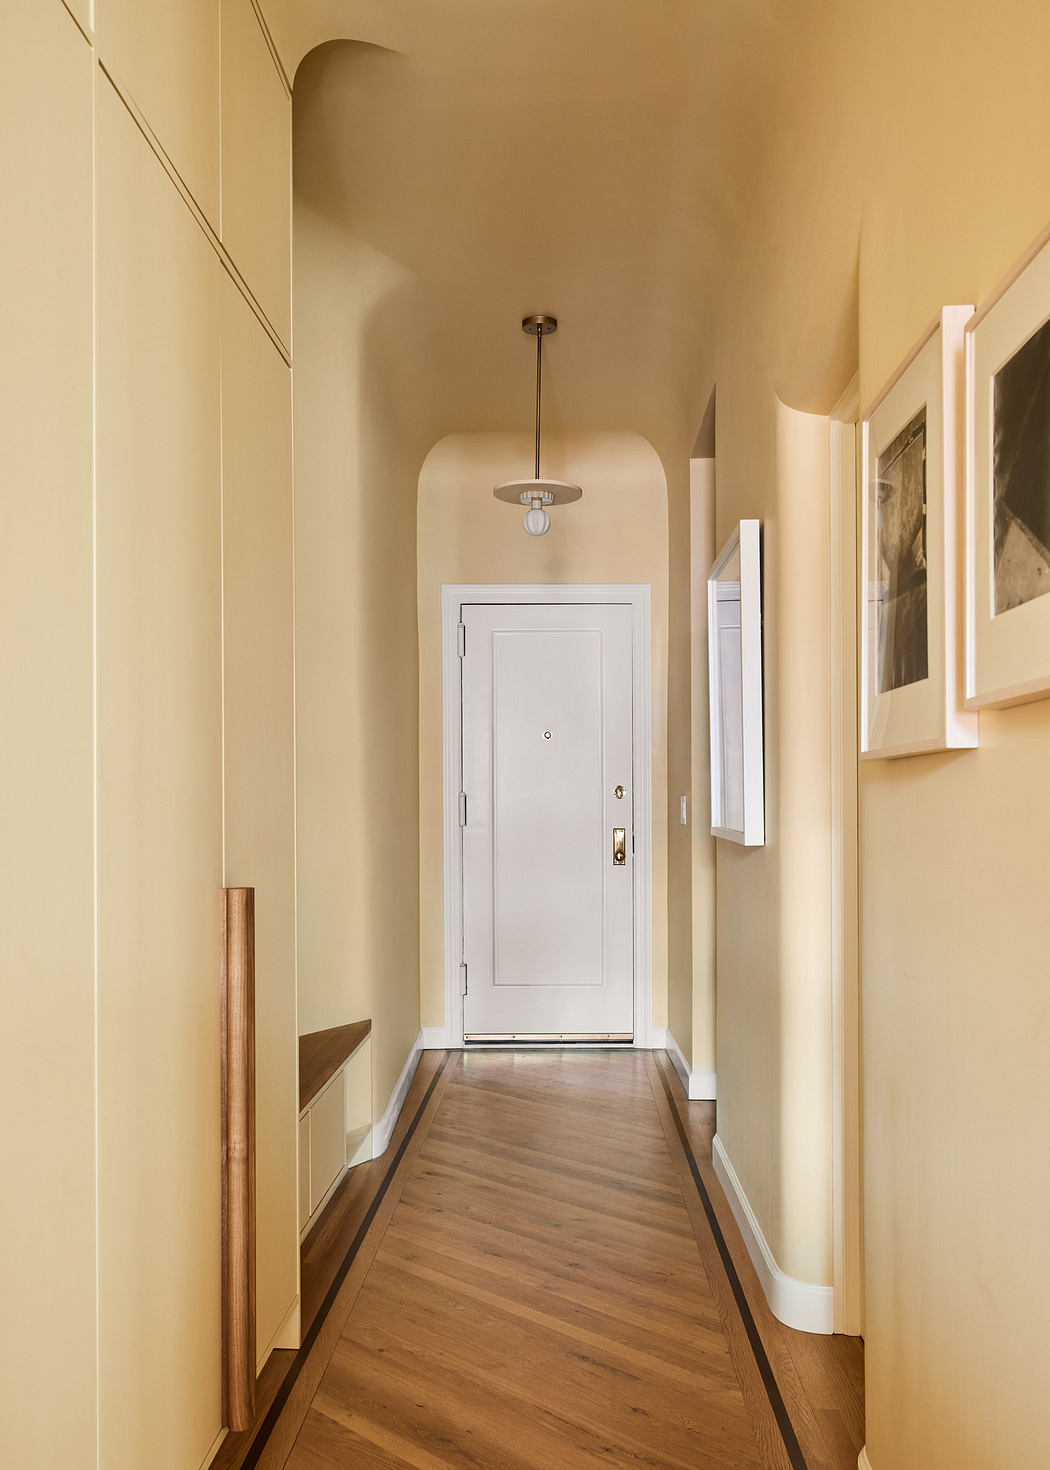 Narrow hallway with wooden floor leading to a white door, framed pictures on wall